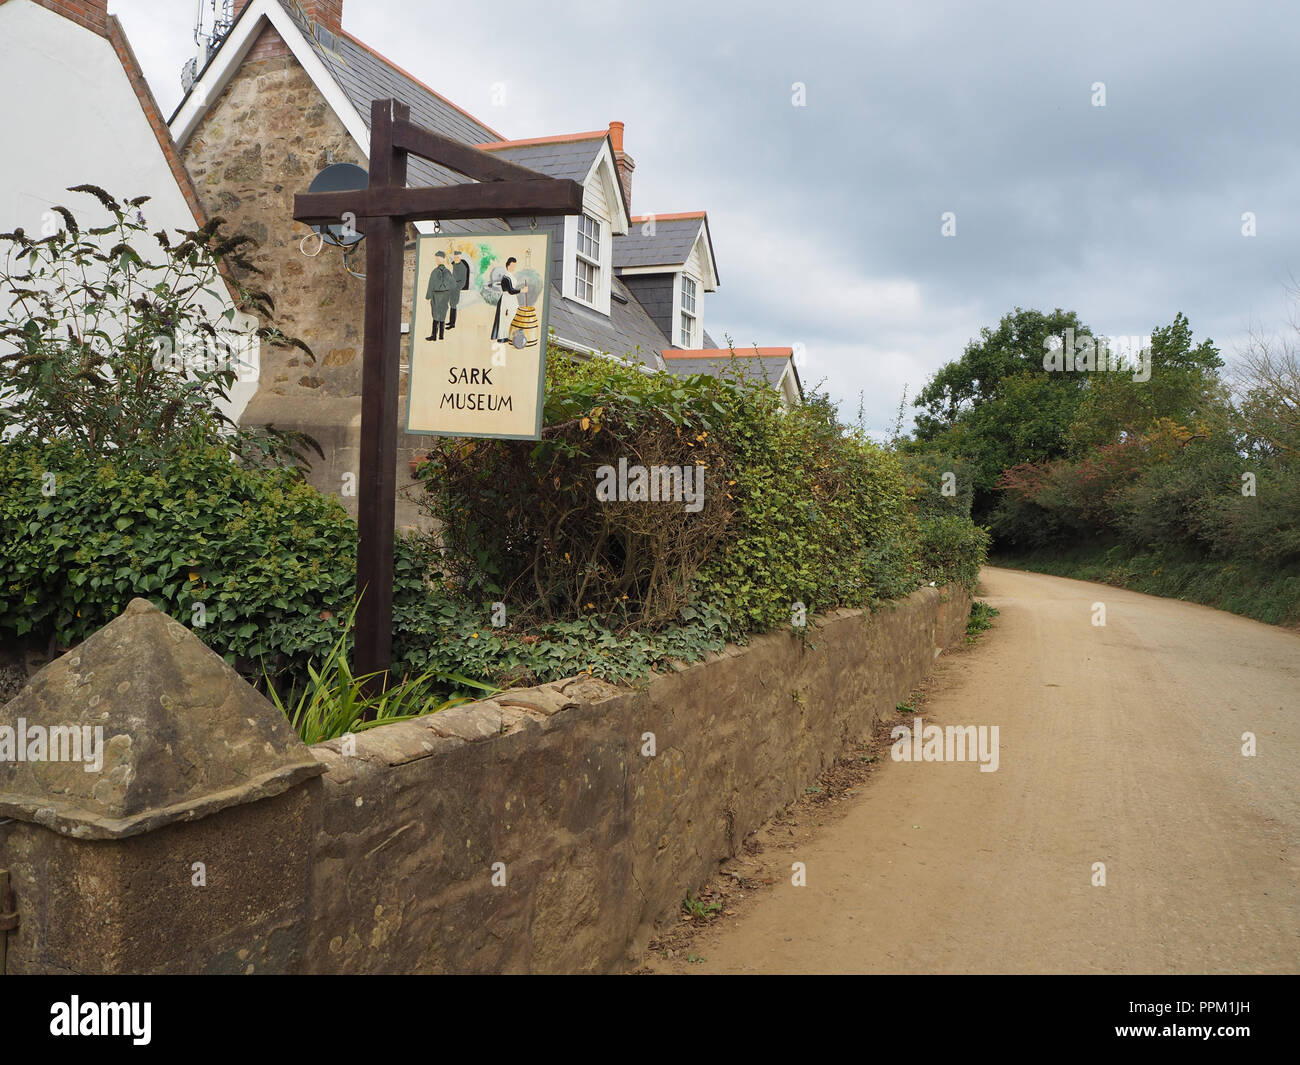 The Sark Museum, Sark, The Channel Islands Stock Photo